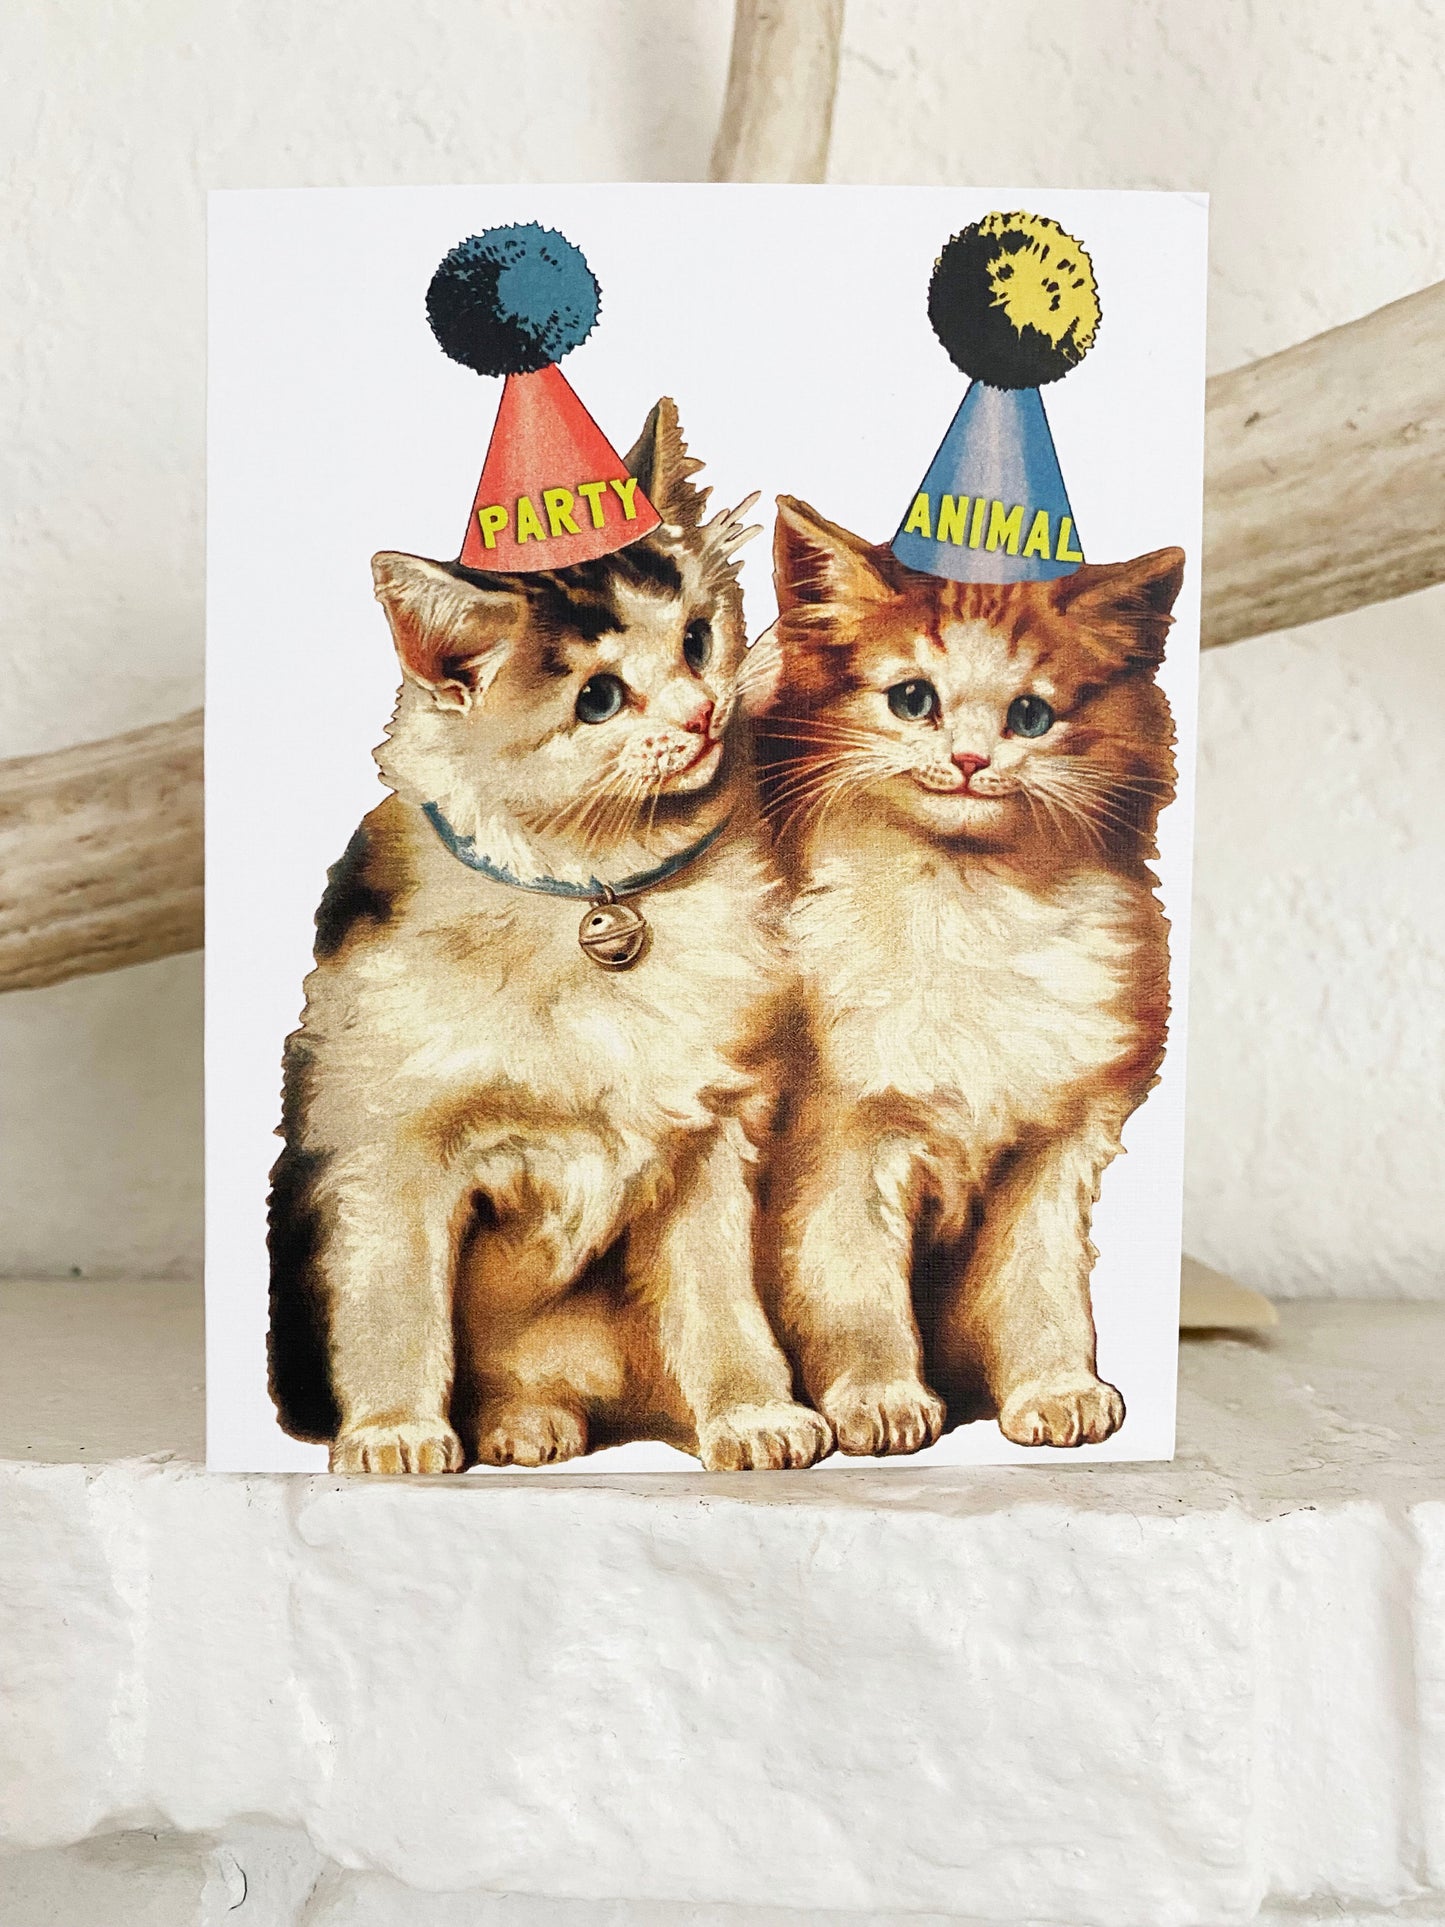 greeting card party animal vintage cats kittens wearing party hats any occasion birthday congratulations celebrate blank inside 